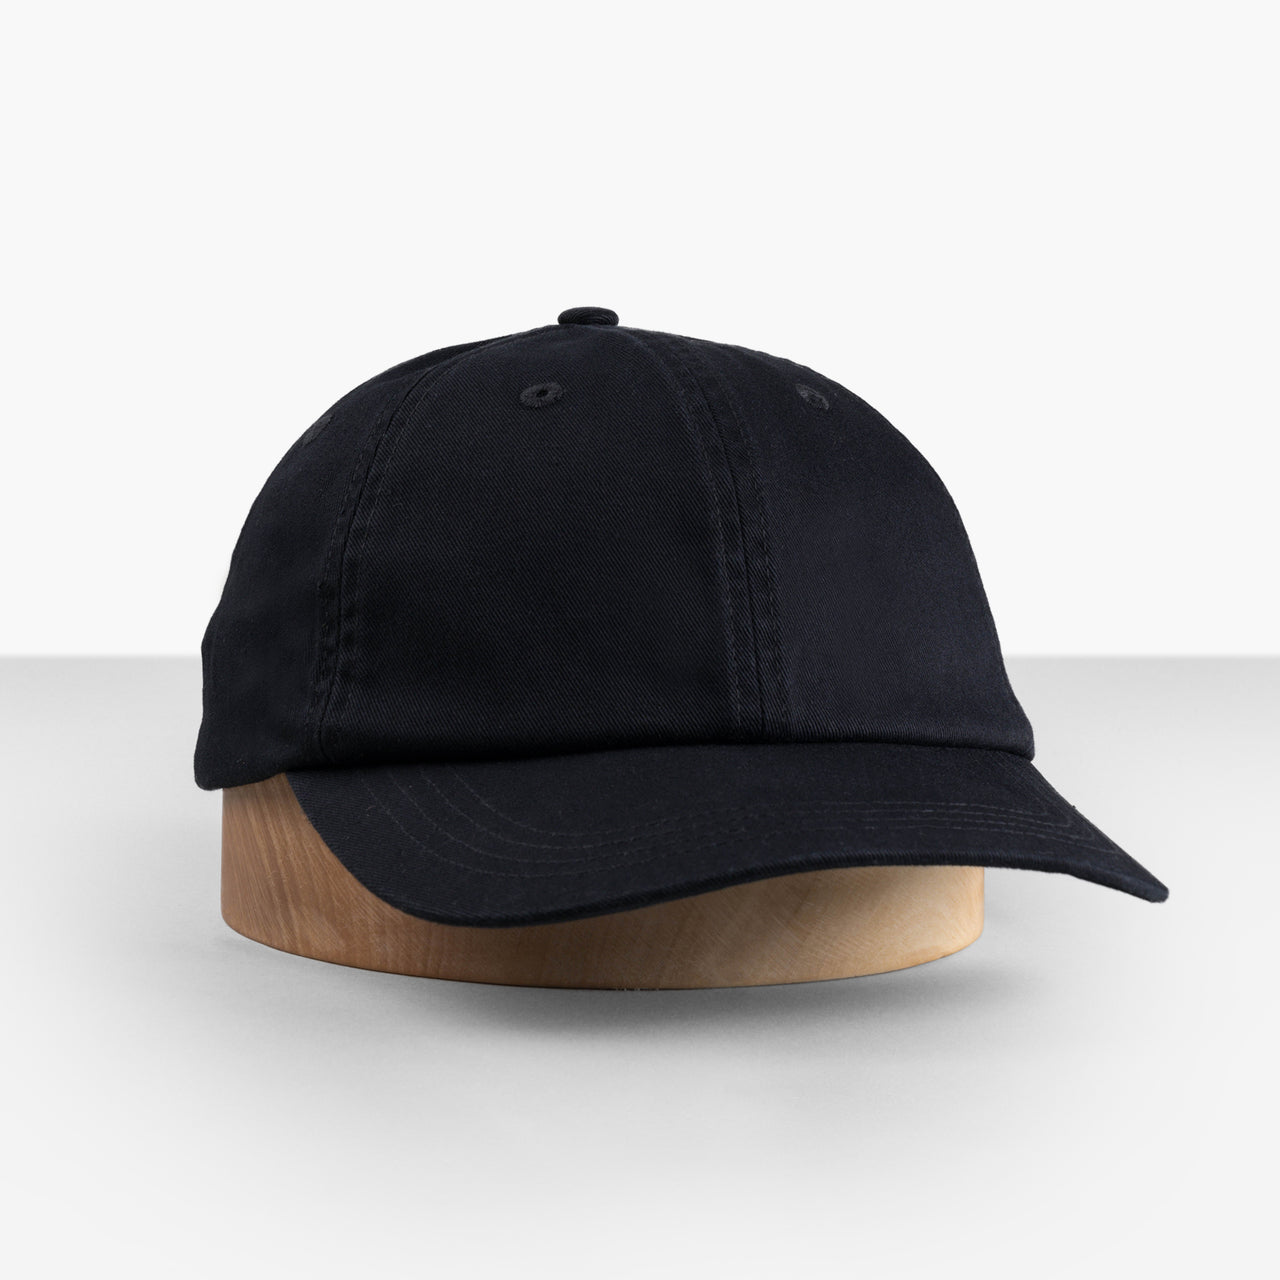 Collections - Oddjob® Hats